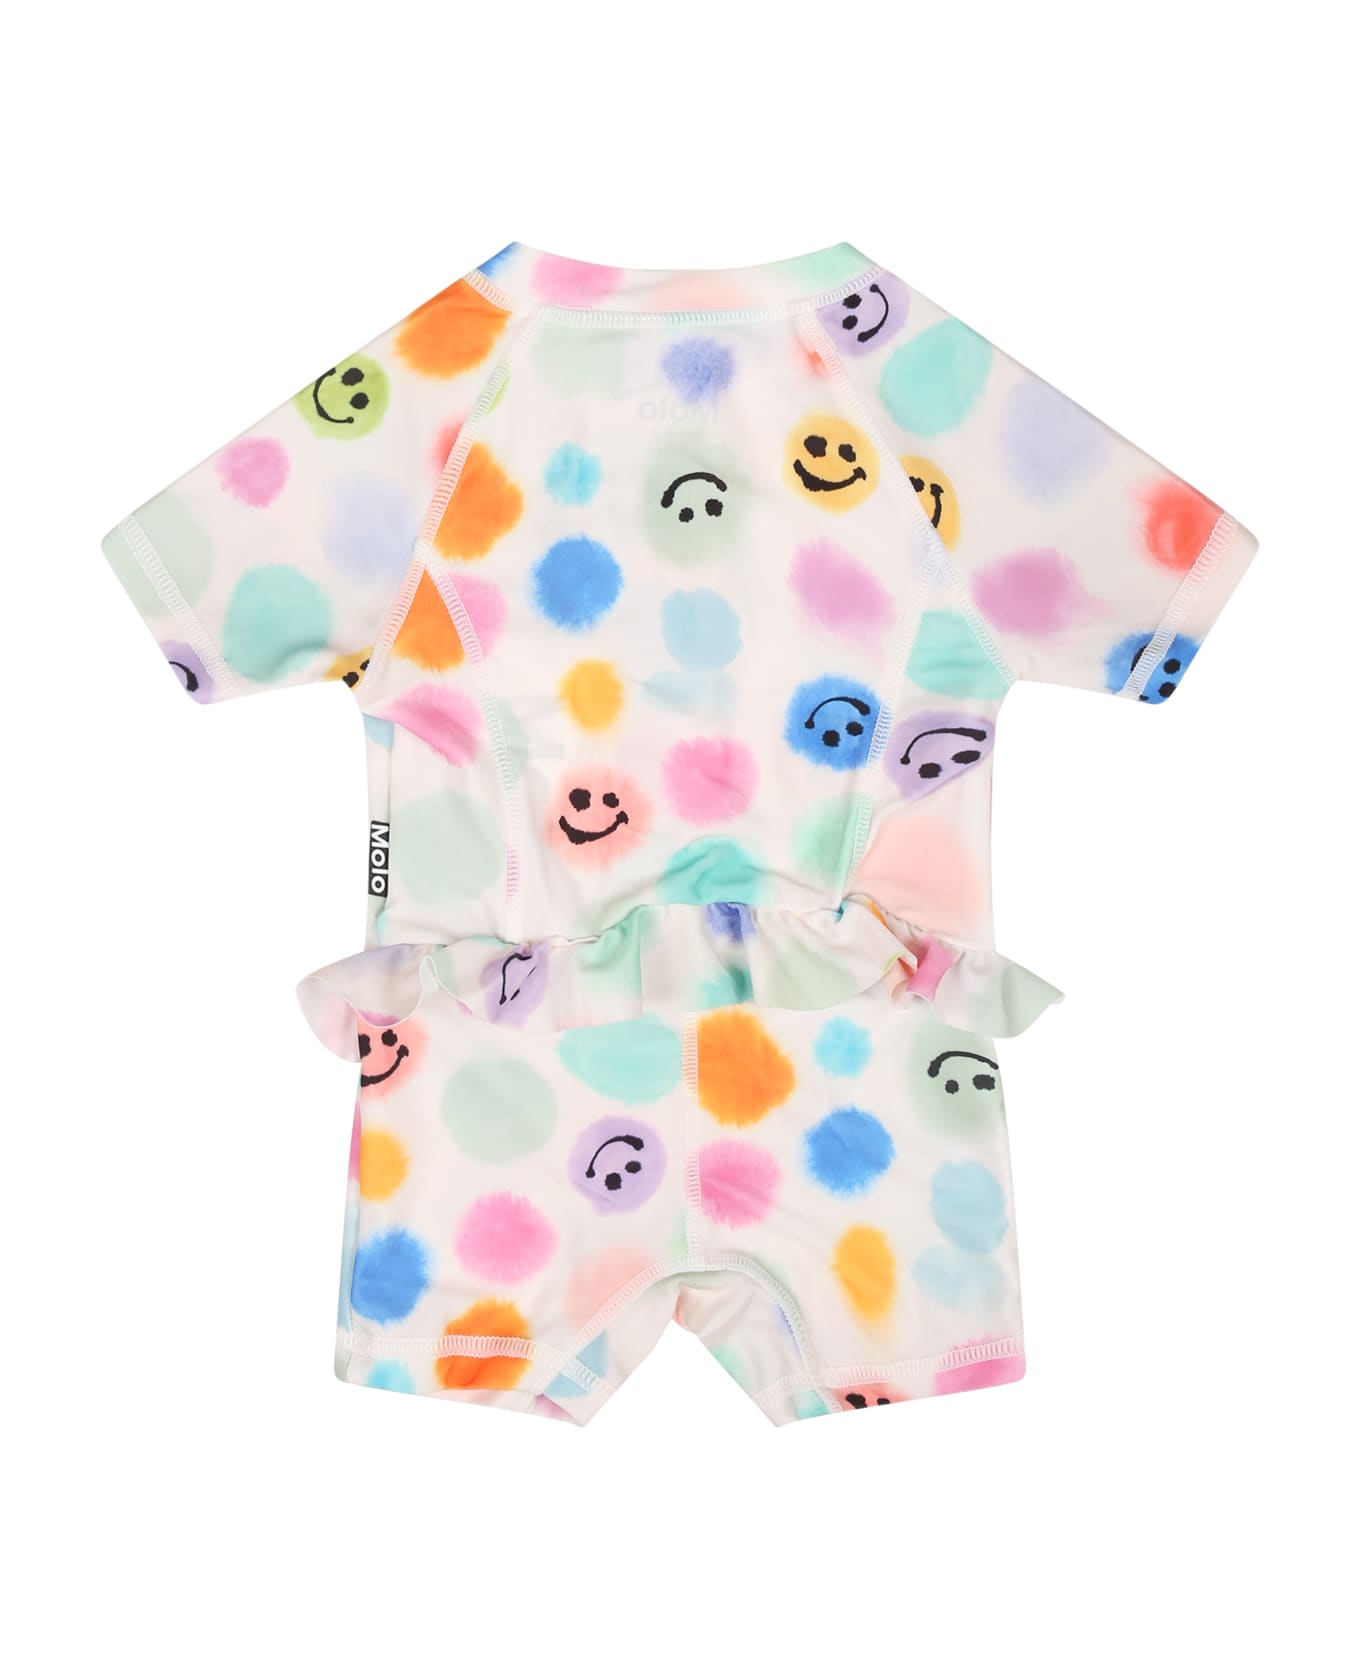 Molo White Swimsuit For Babykids With Polka Dots And Smile - Multicolor